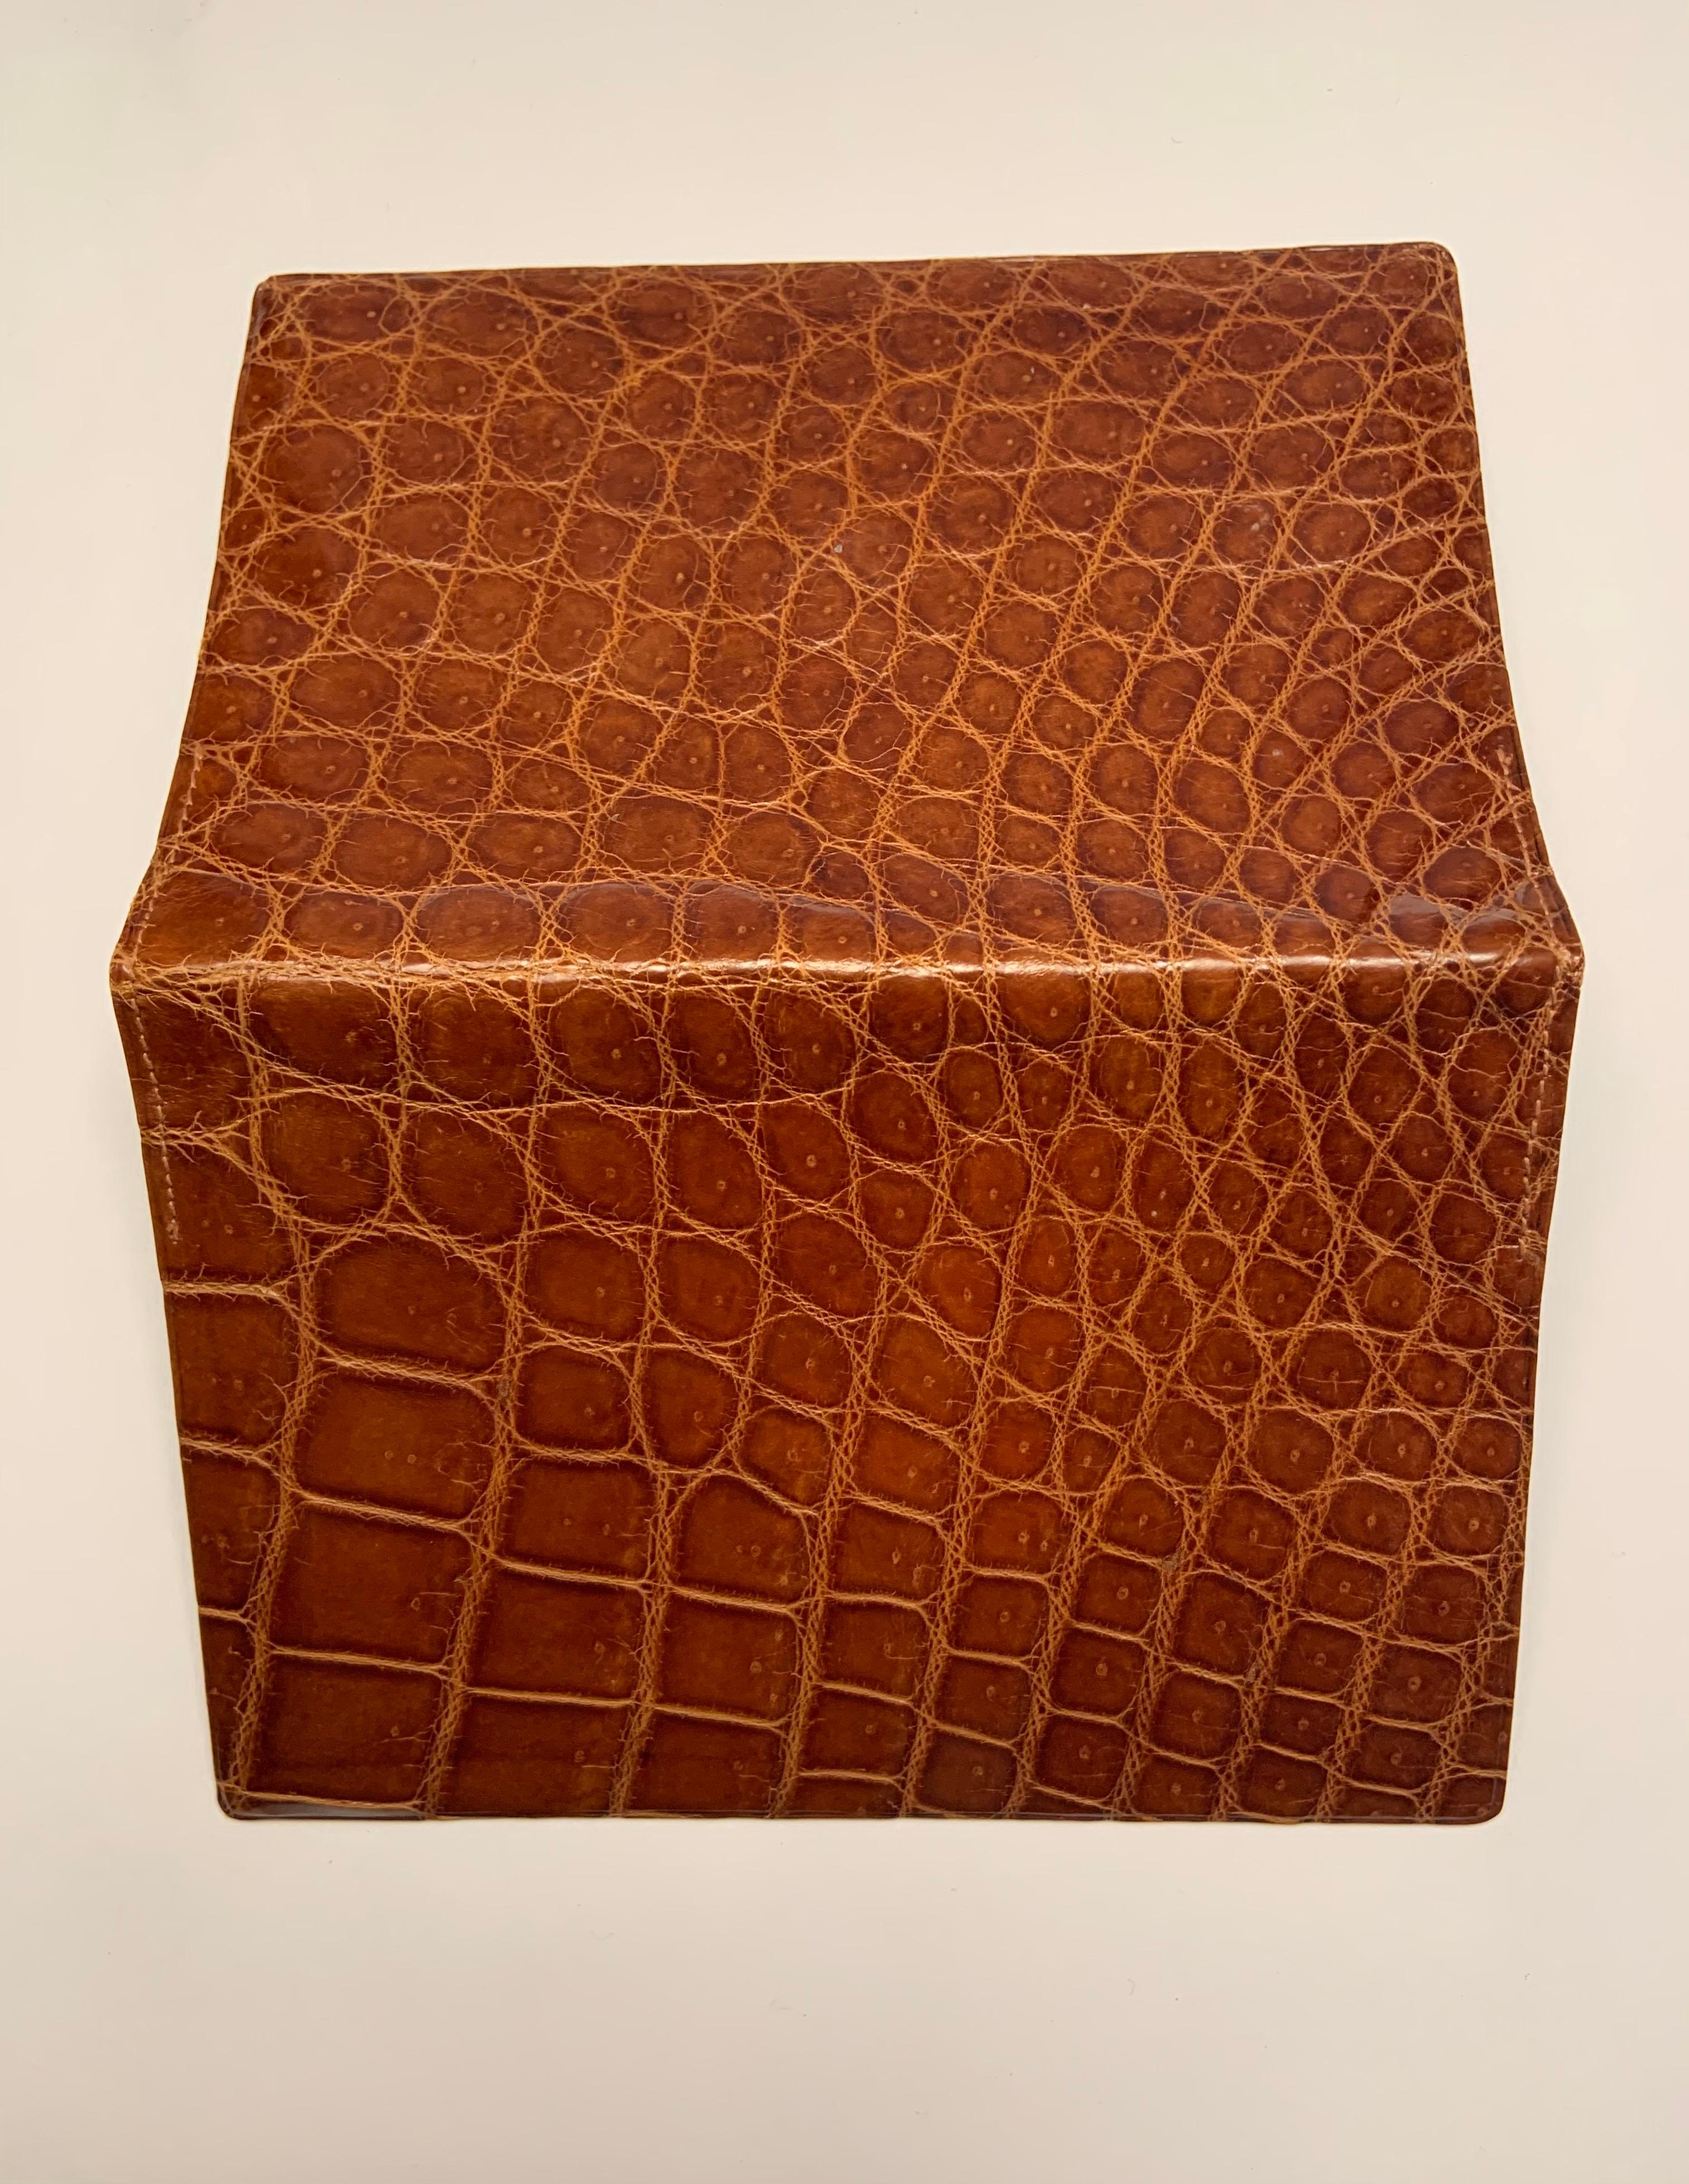 Cognac Colored Mid Centurty Brown Crocodile Wallet Never Used In Excellent Condition For Sale In New Hope, PA